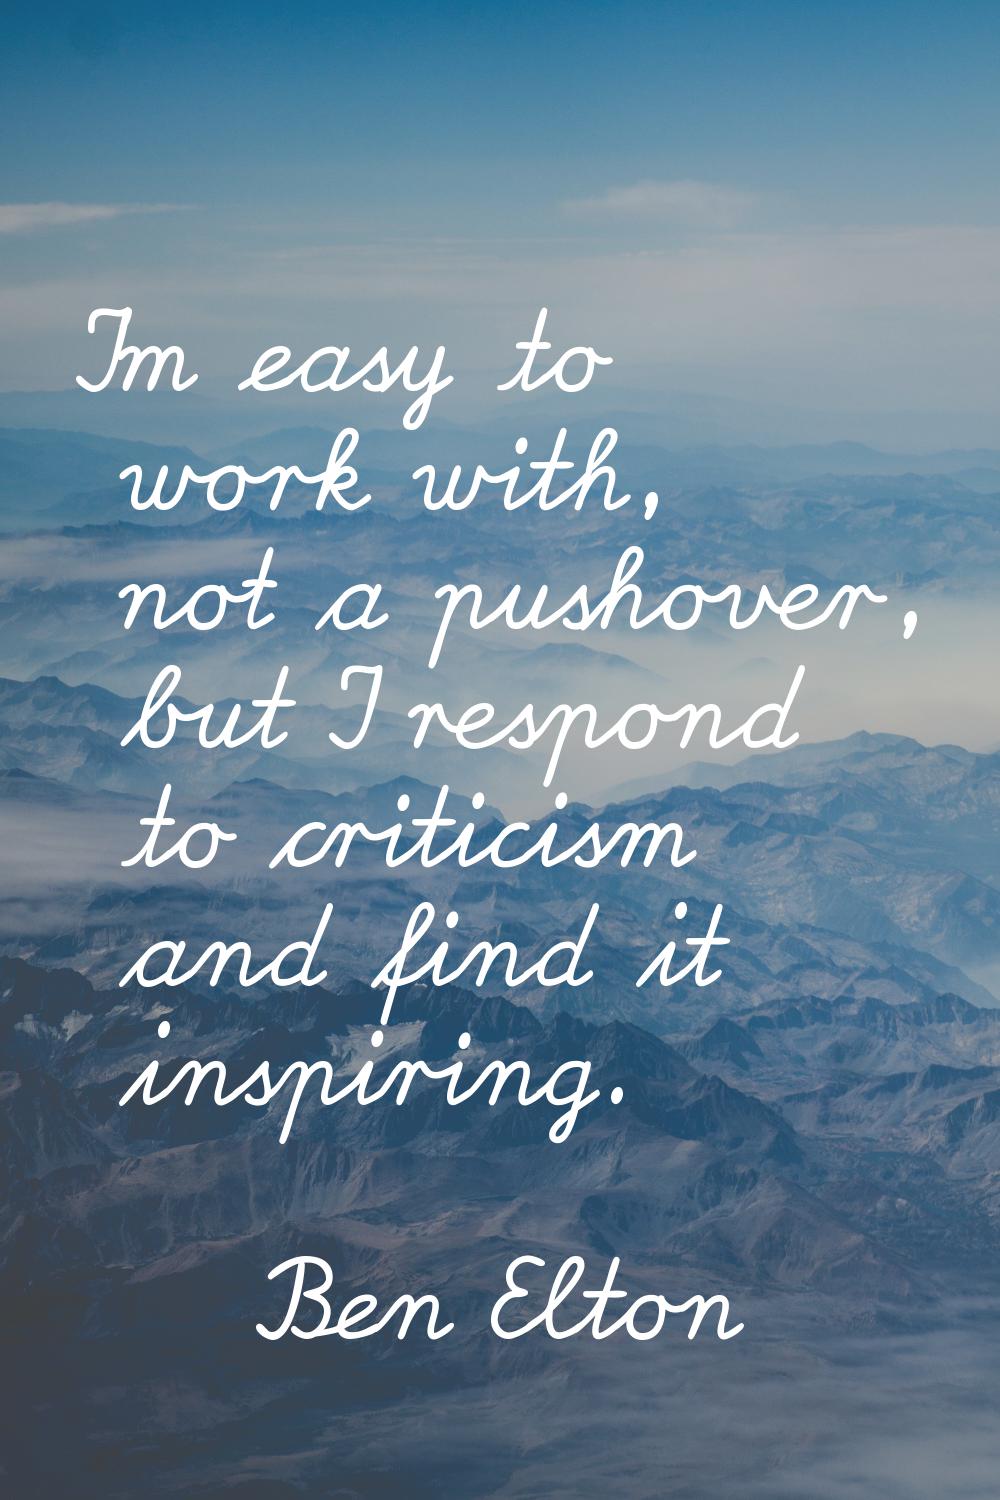 I'm easy to work with, not a pushover, but I respond to criticism and find it inspiring.